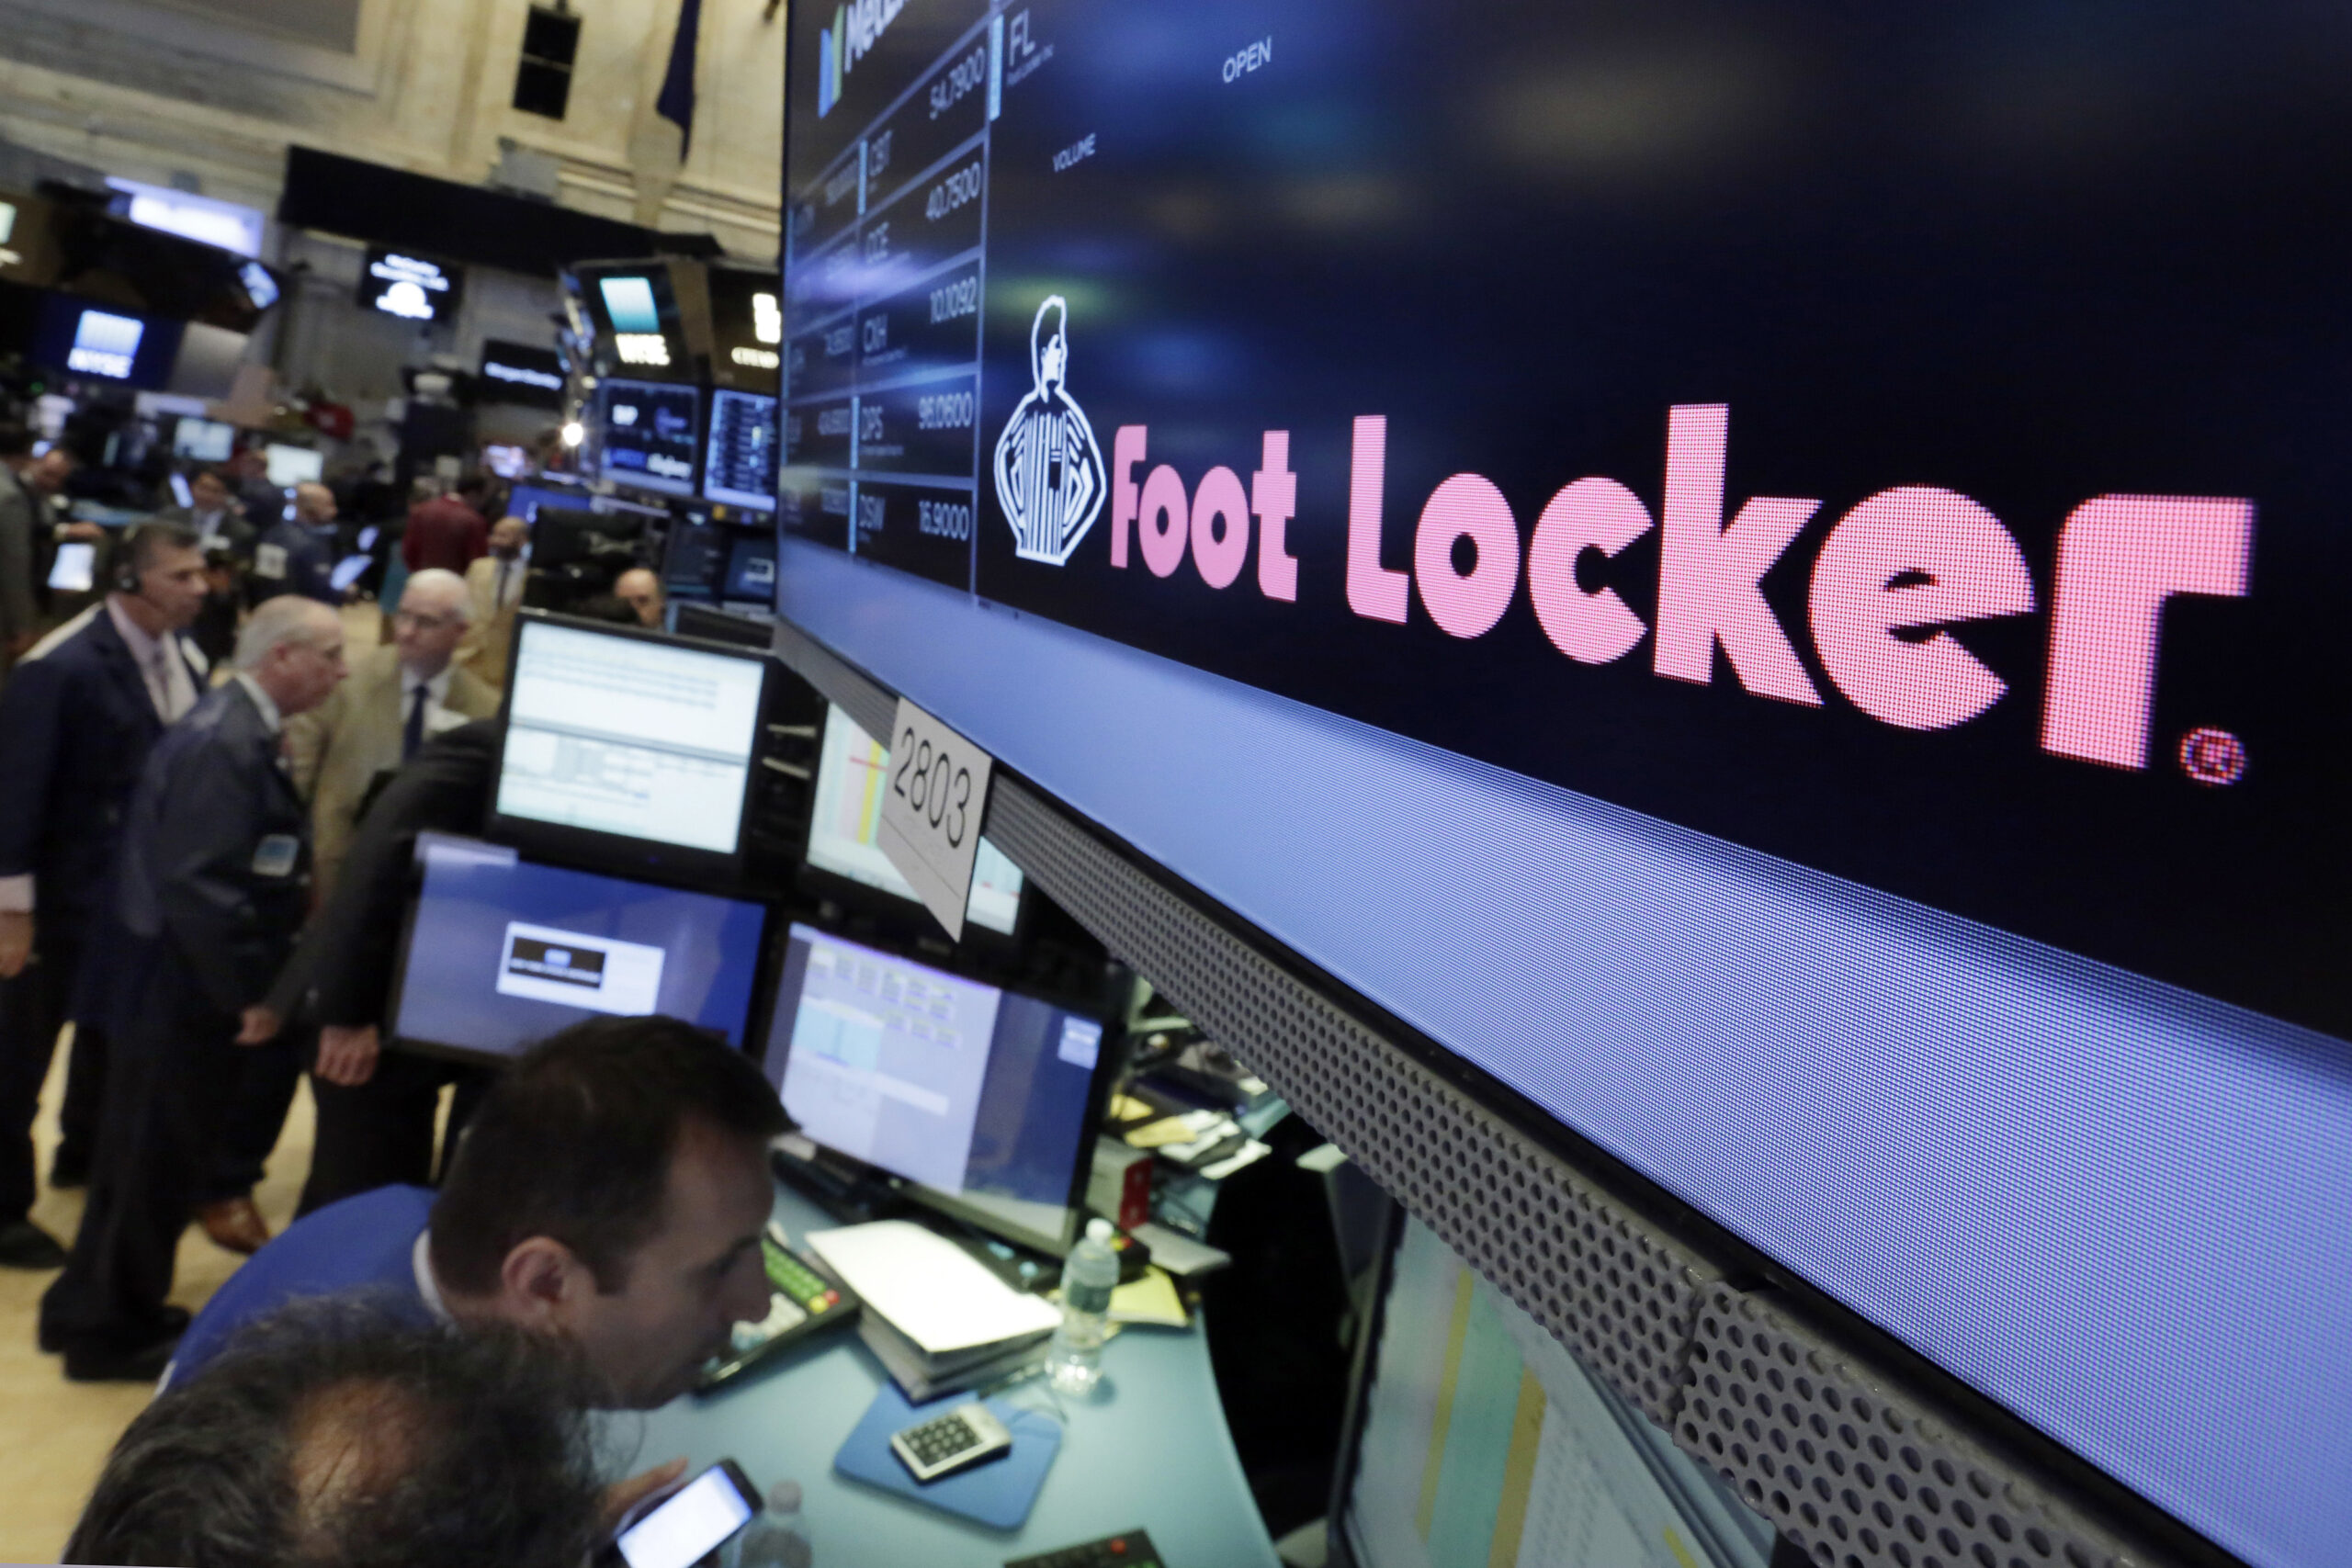 Foot Locker will close its Oshkosh call center, affecting almost 100 people